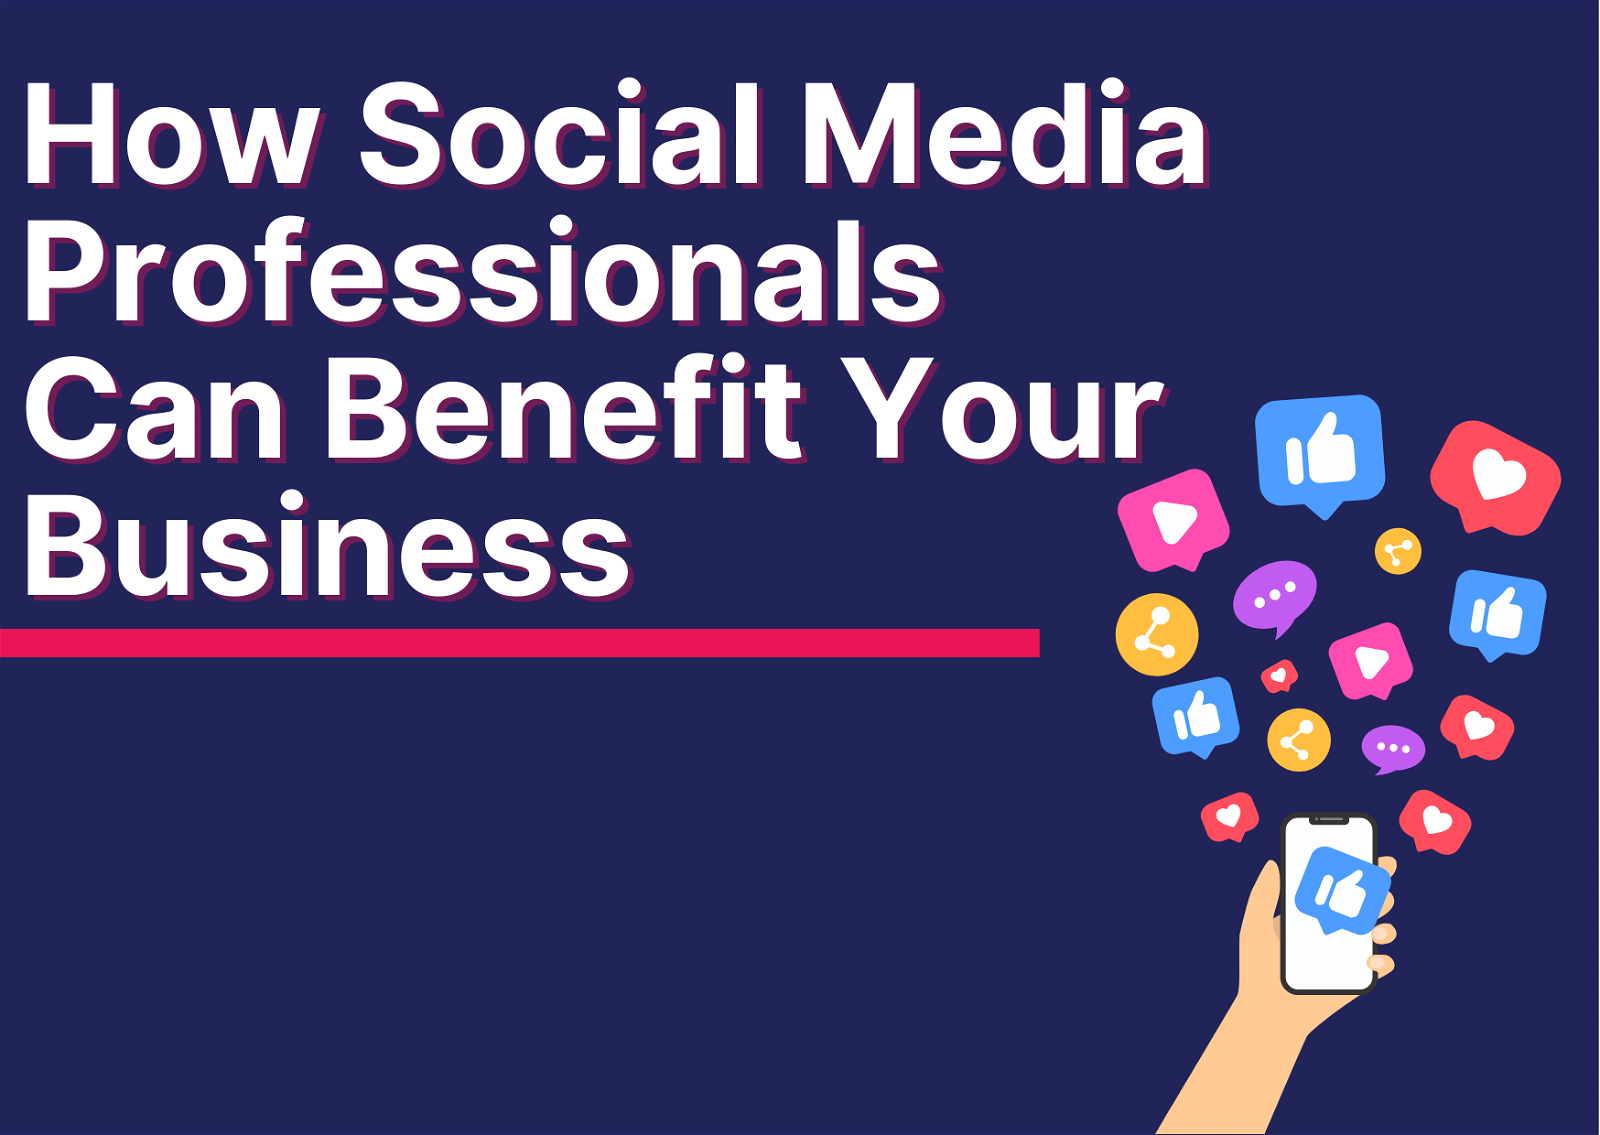 How Social Media Professionals Can Benefit Your Business